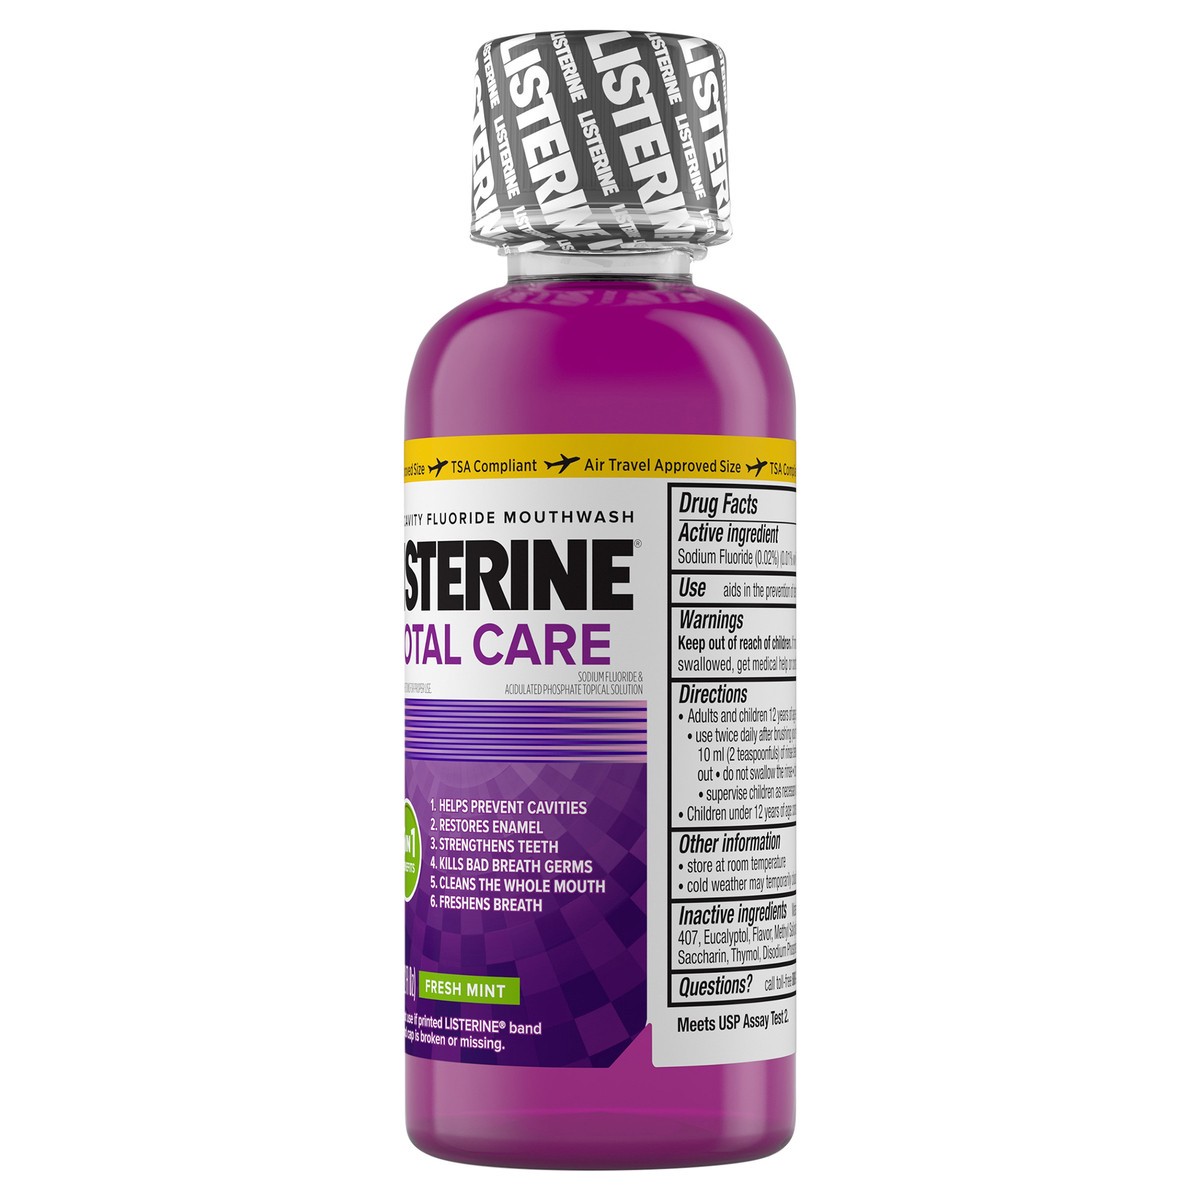 slide 2 of 11, Listerine Total Care Anticavity Fluoride Mouthwash, 6 Benefit Oral Rinse Kills 99% of Bad Breath Germs, Prevents Cavities, Strengthens Enamel, ADA-Accepted, Fresh Mint, Travel Size, 95 mL, 95 ml